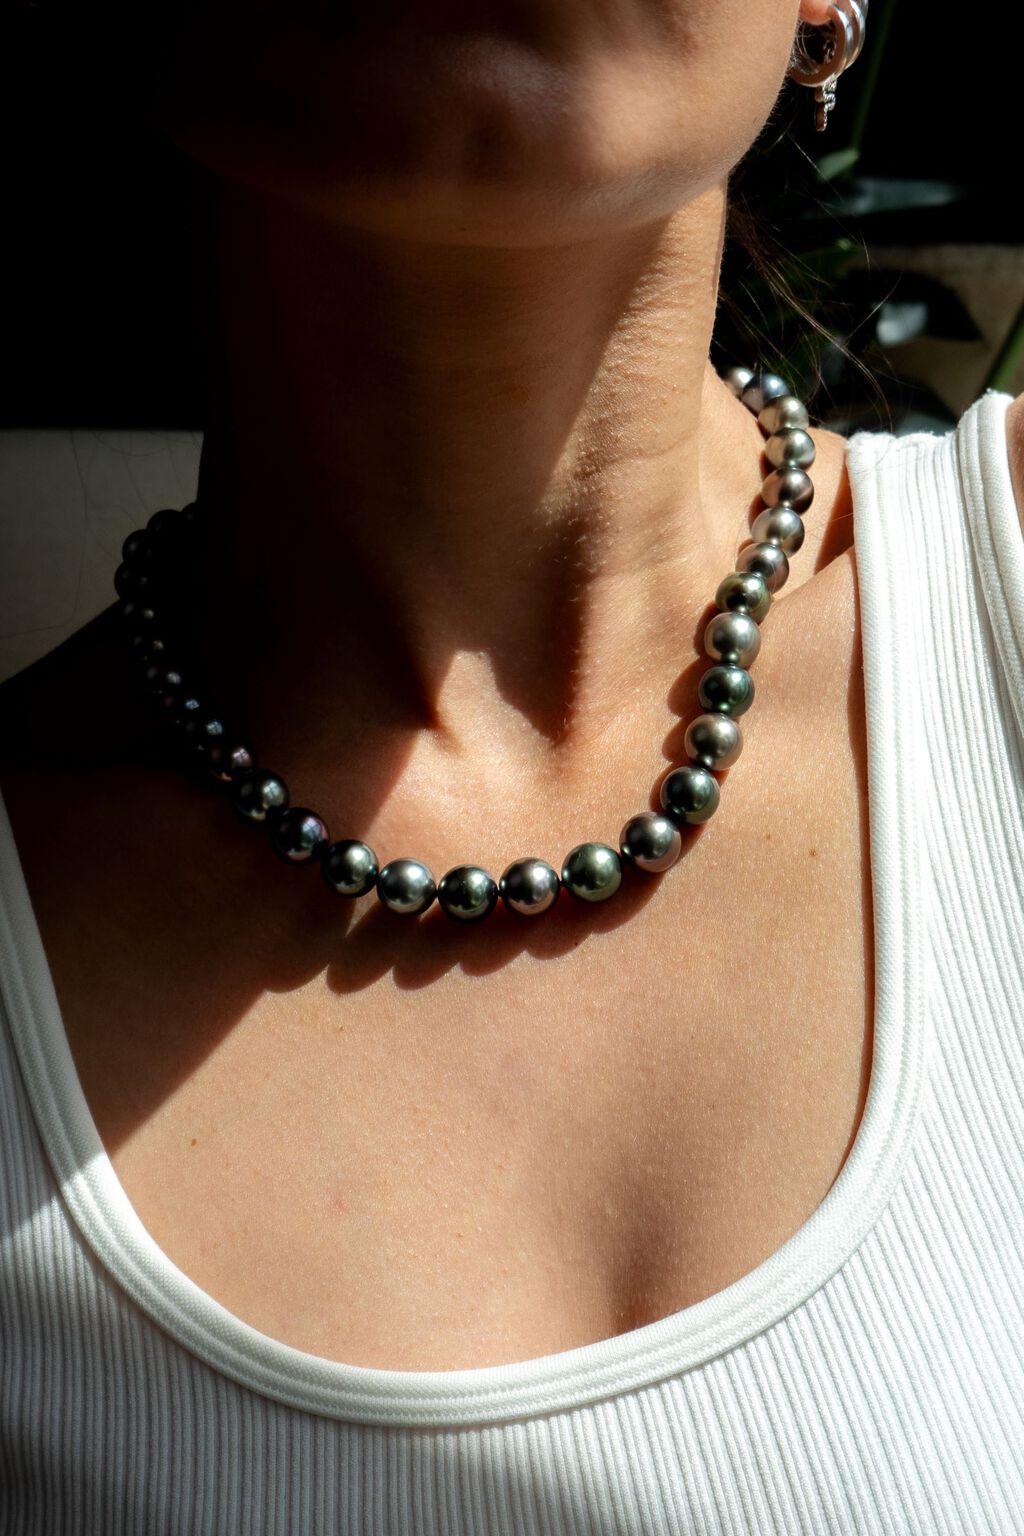 Woman in white tank top wearing silver-colored Tahitian pearls